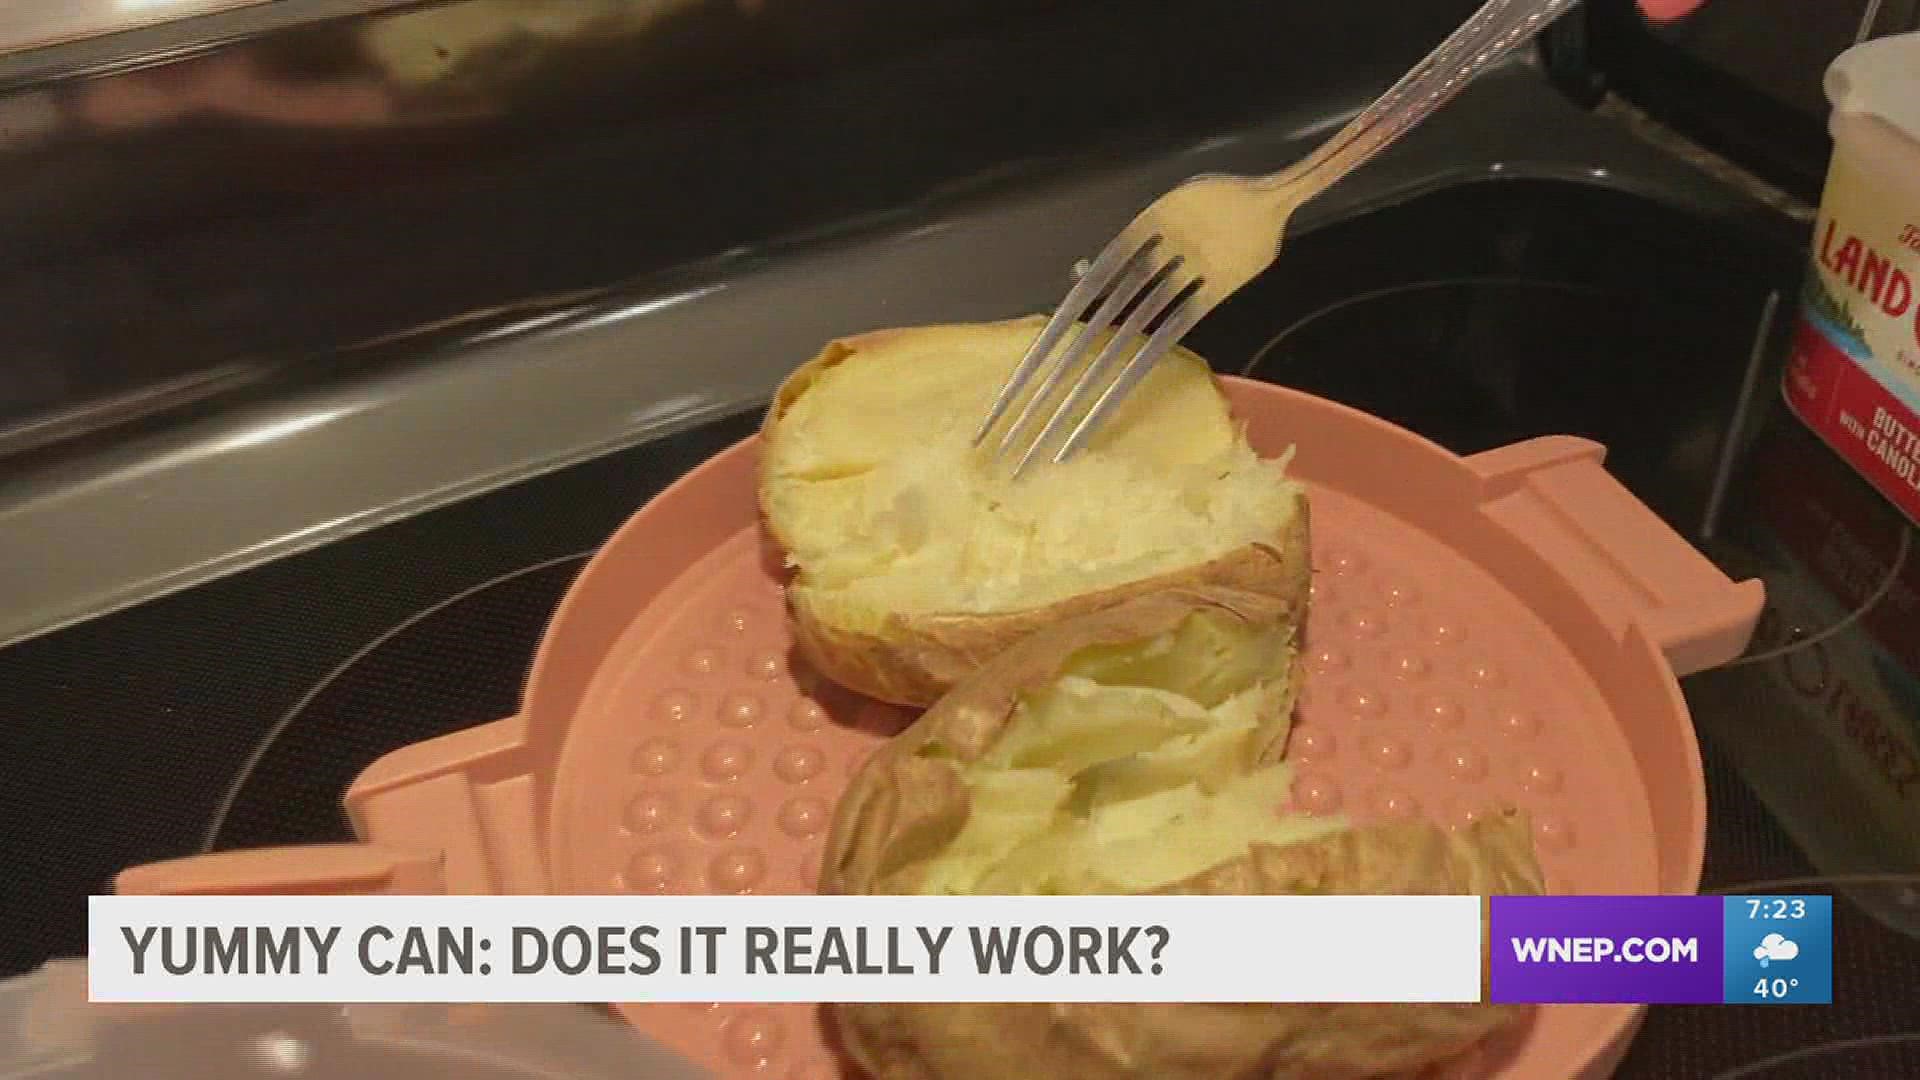 The maker claims the product makes the perfect baked potato in just minutes.